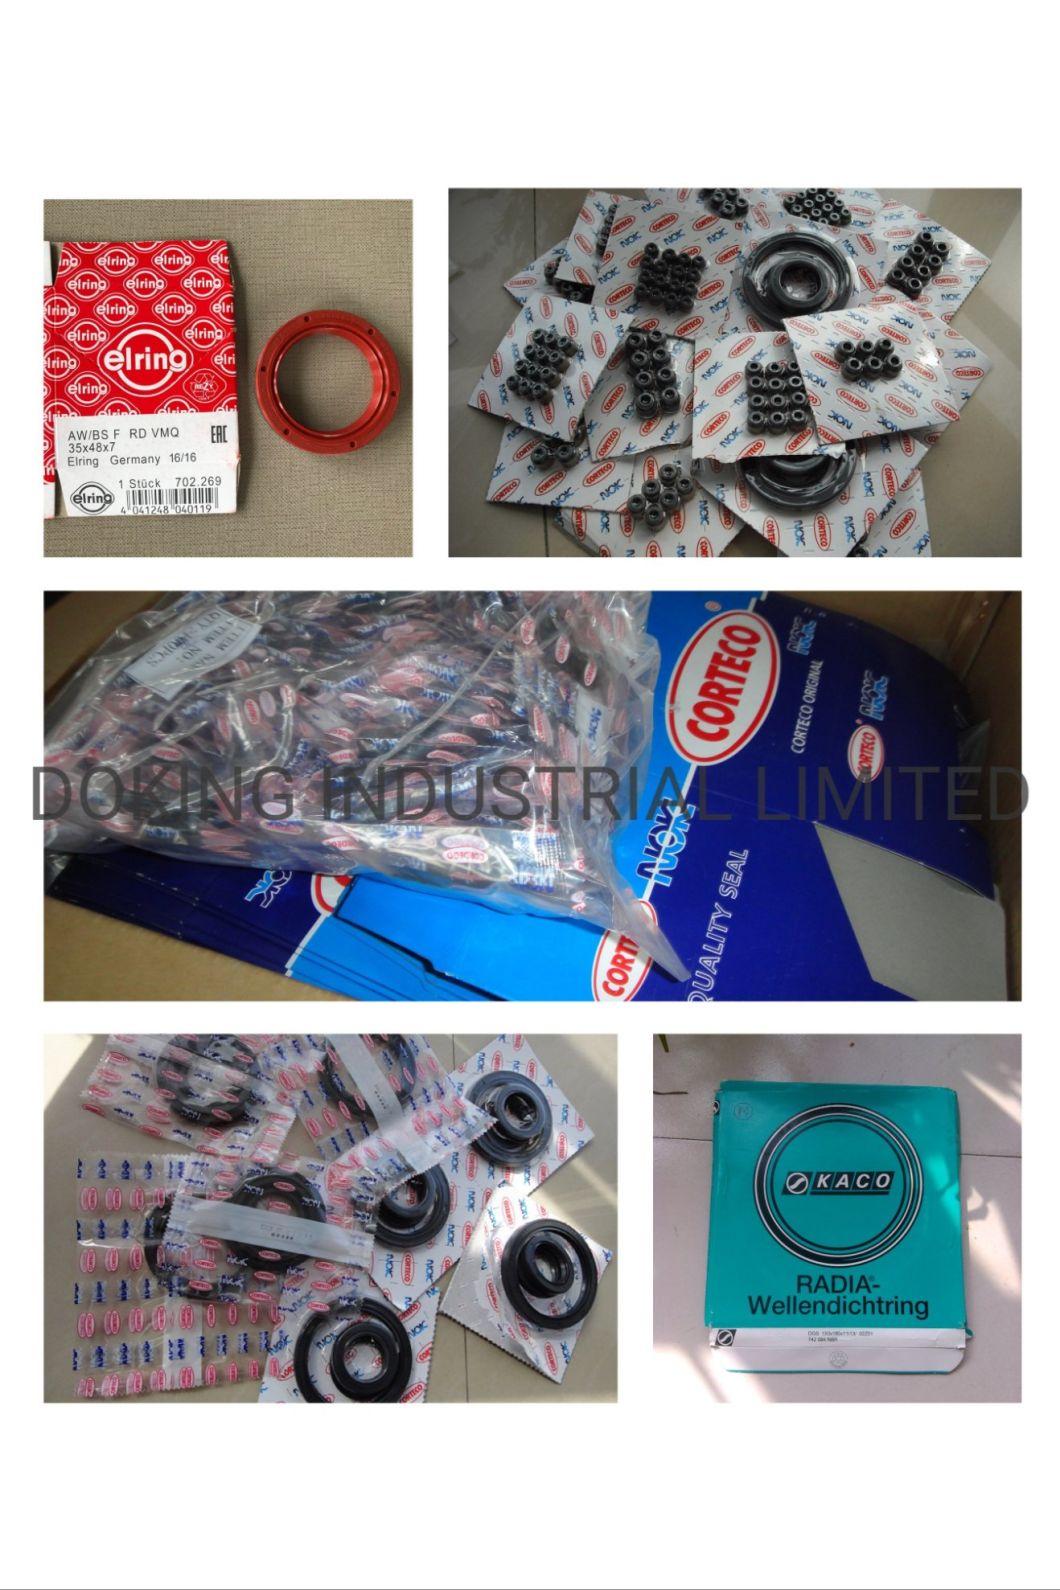 NBR Oil Seal with Nylon Ring for Car